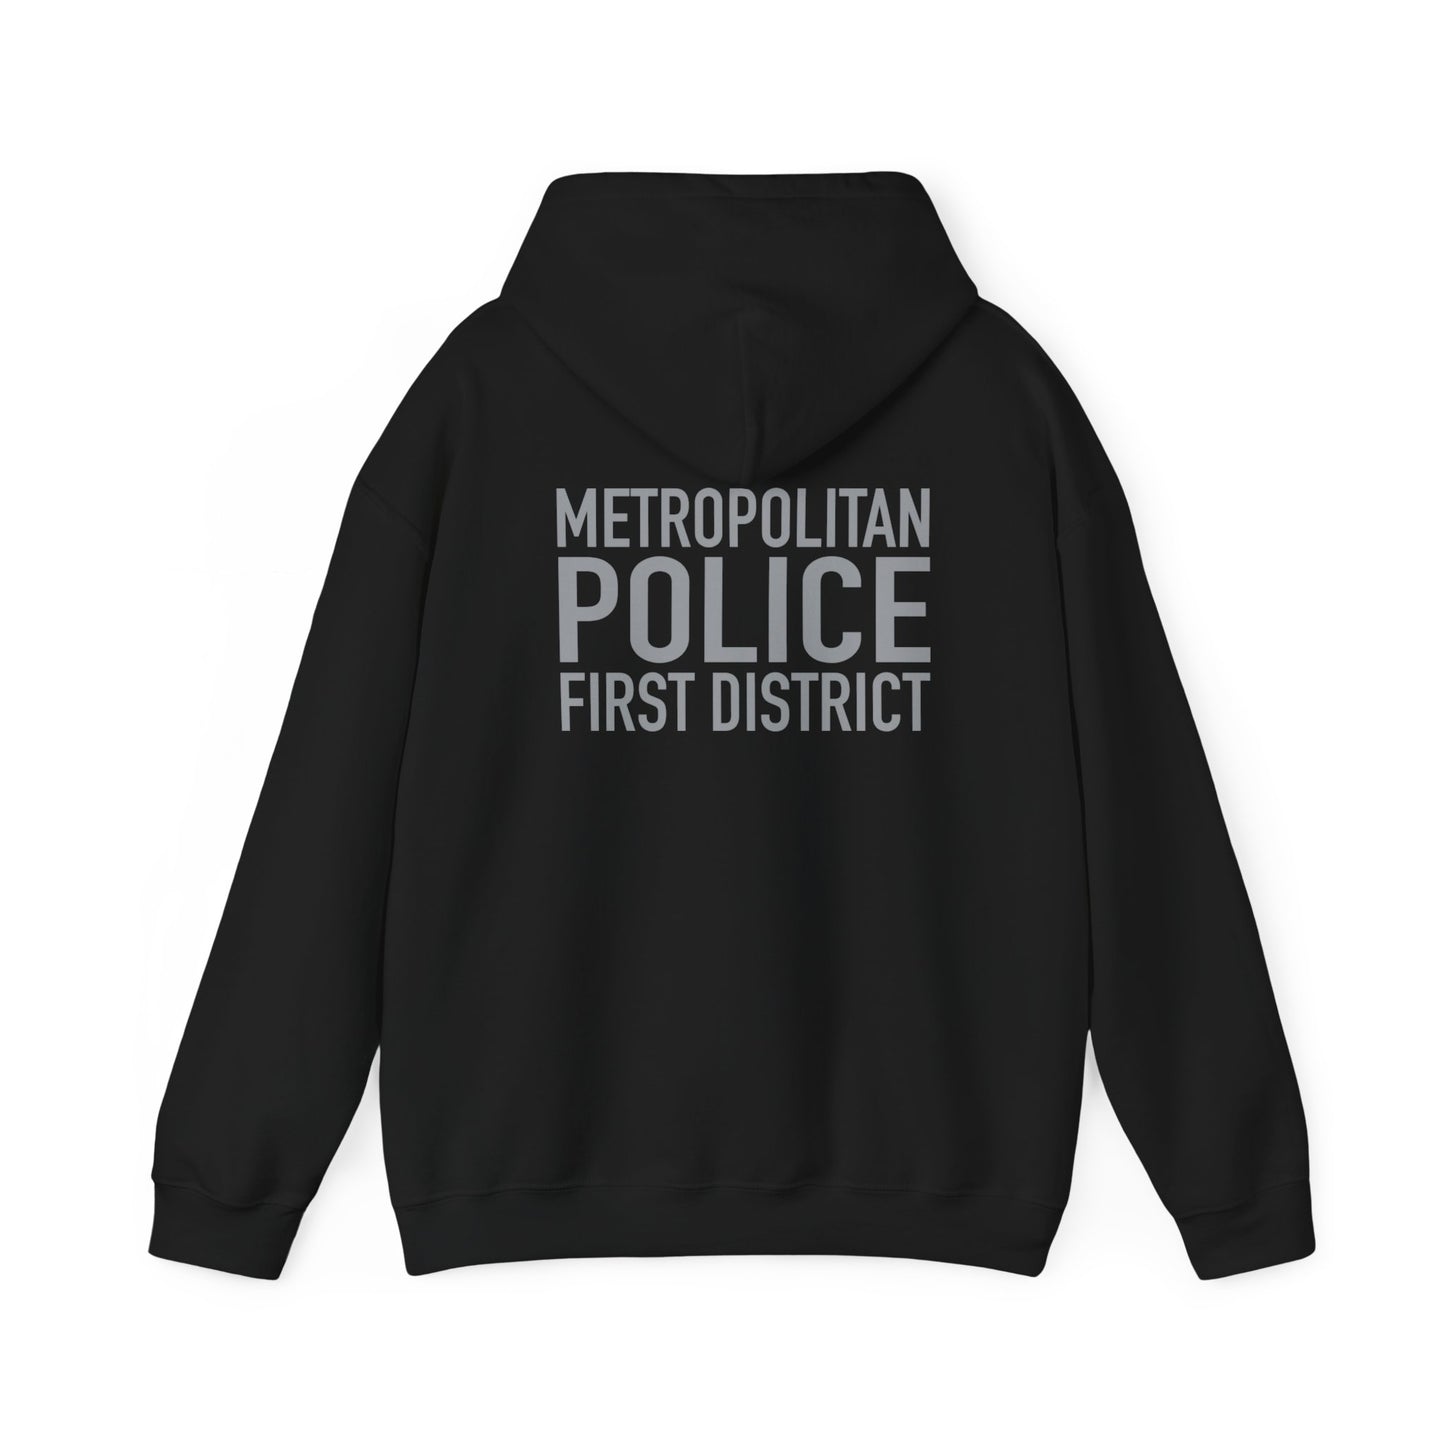 Classic MPD First District Hooded Sweatshirt